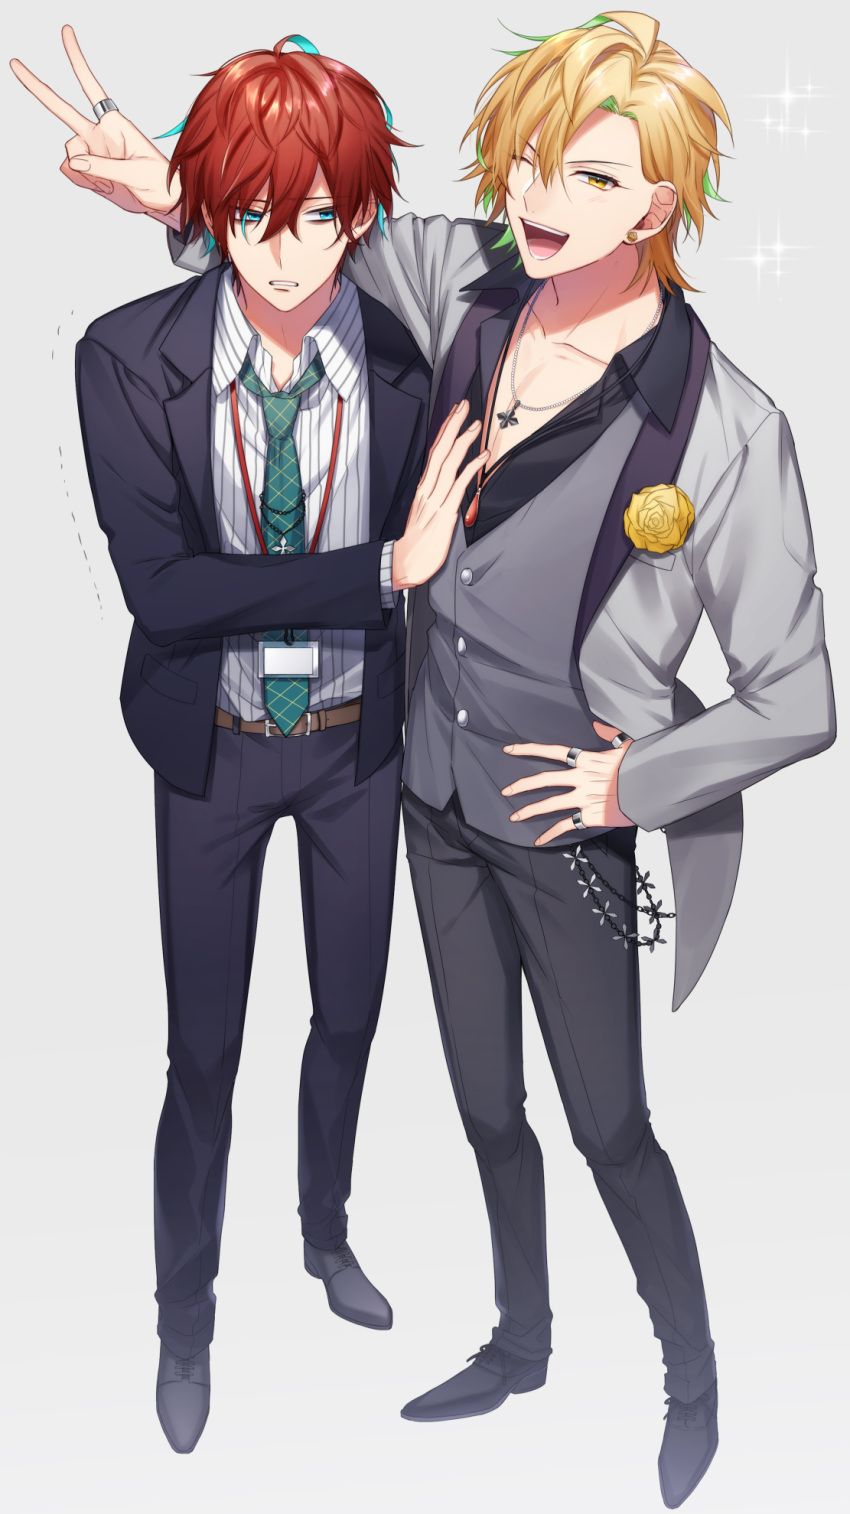 blonde_hair flower formal green_eyes hand_on_hip host hypnosis_mic izanami_hifumi jewelry kannonzaka_doppo lanyard multicolored_hair multiple_boys necklace open_mouth peace_symbol piercing red_hair ring rose salaryman smile sparkle suit wallet_chain yellow_eyes yellow_flower yellow_rose